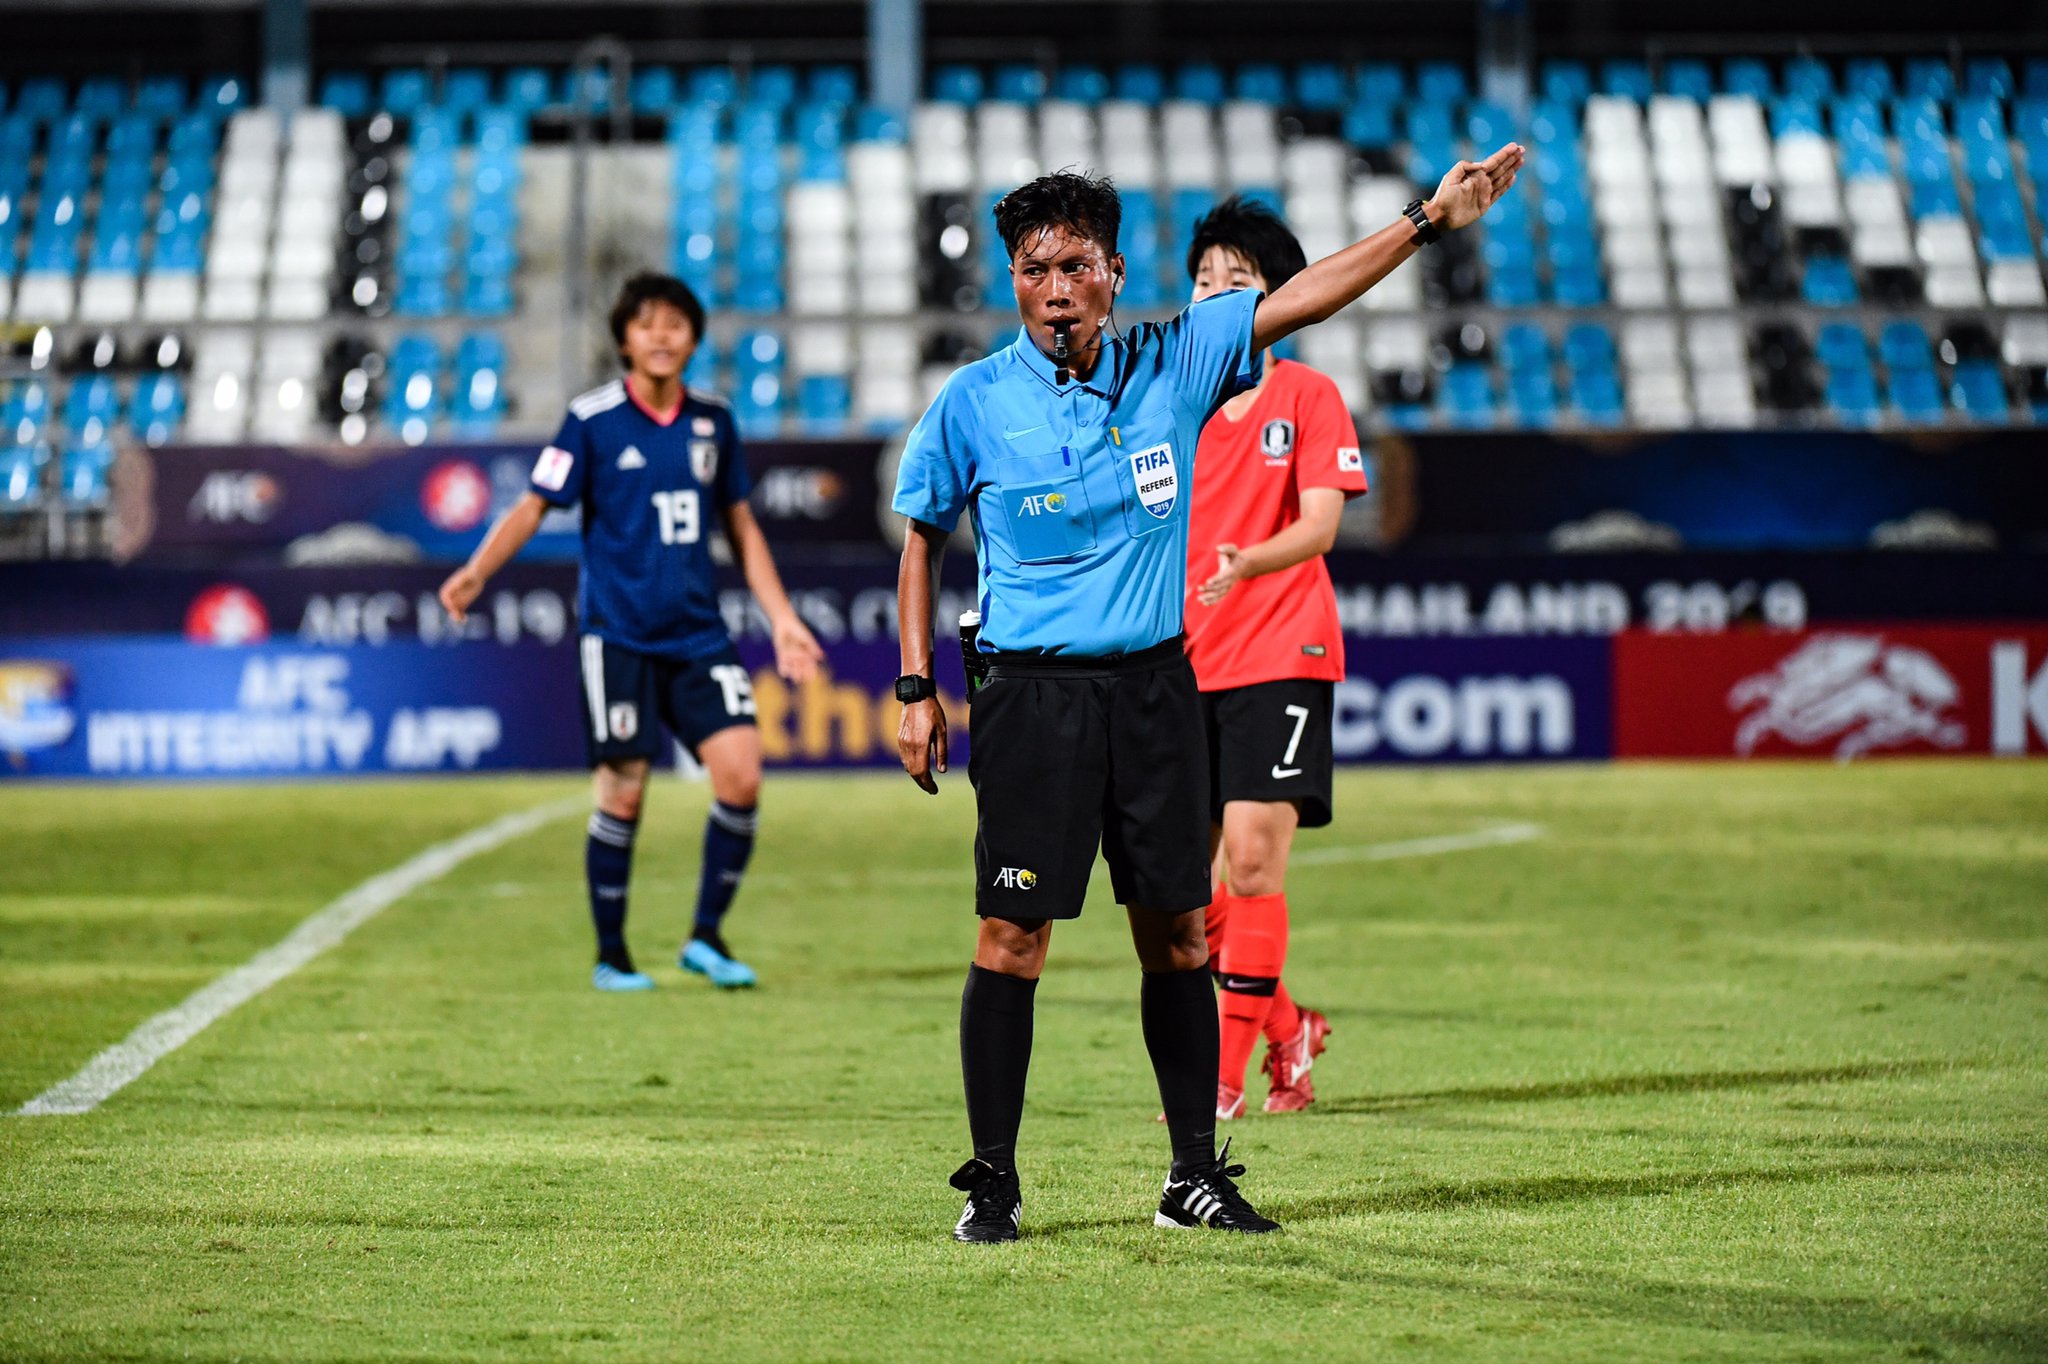 Meet the FIFA referee from Manipur who broke glass ceilings with grit, game